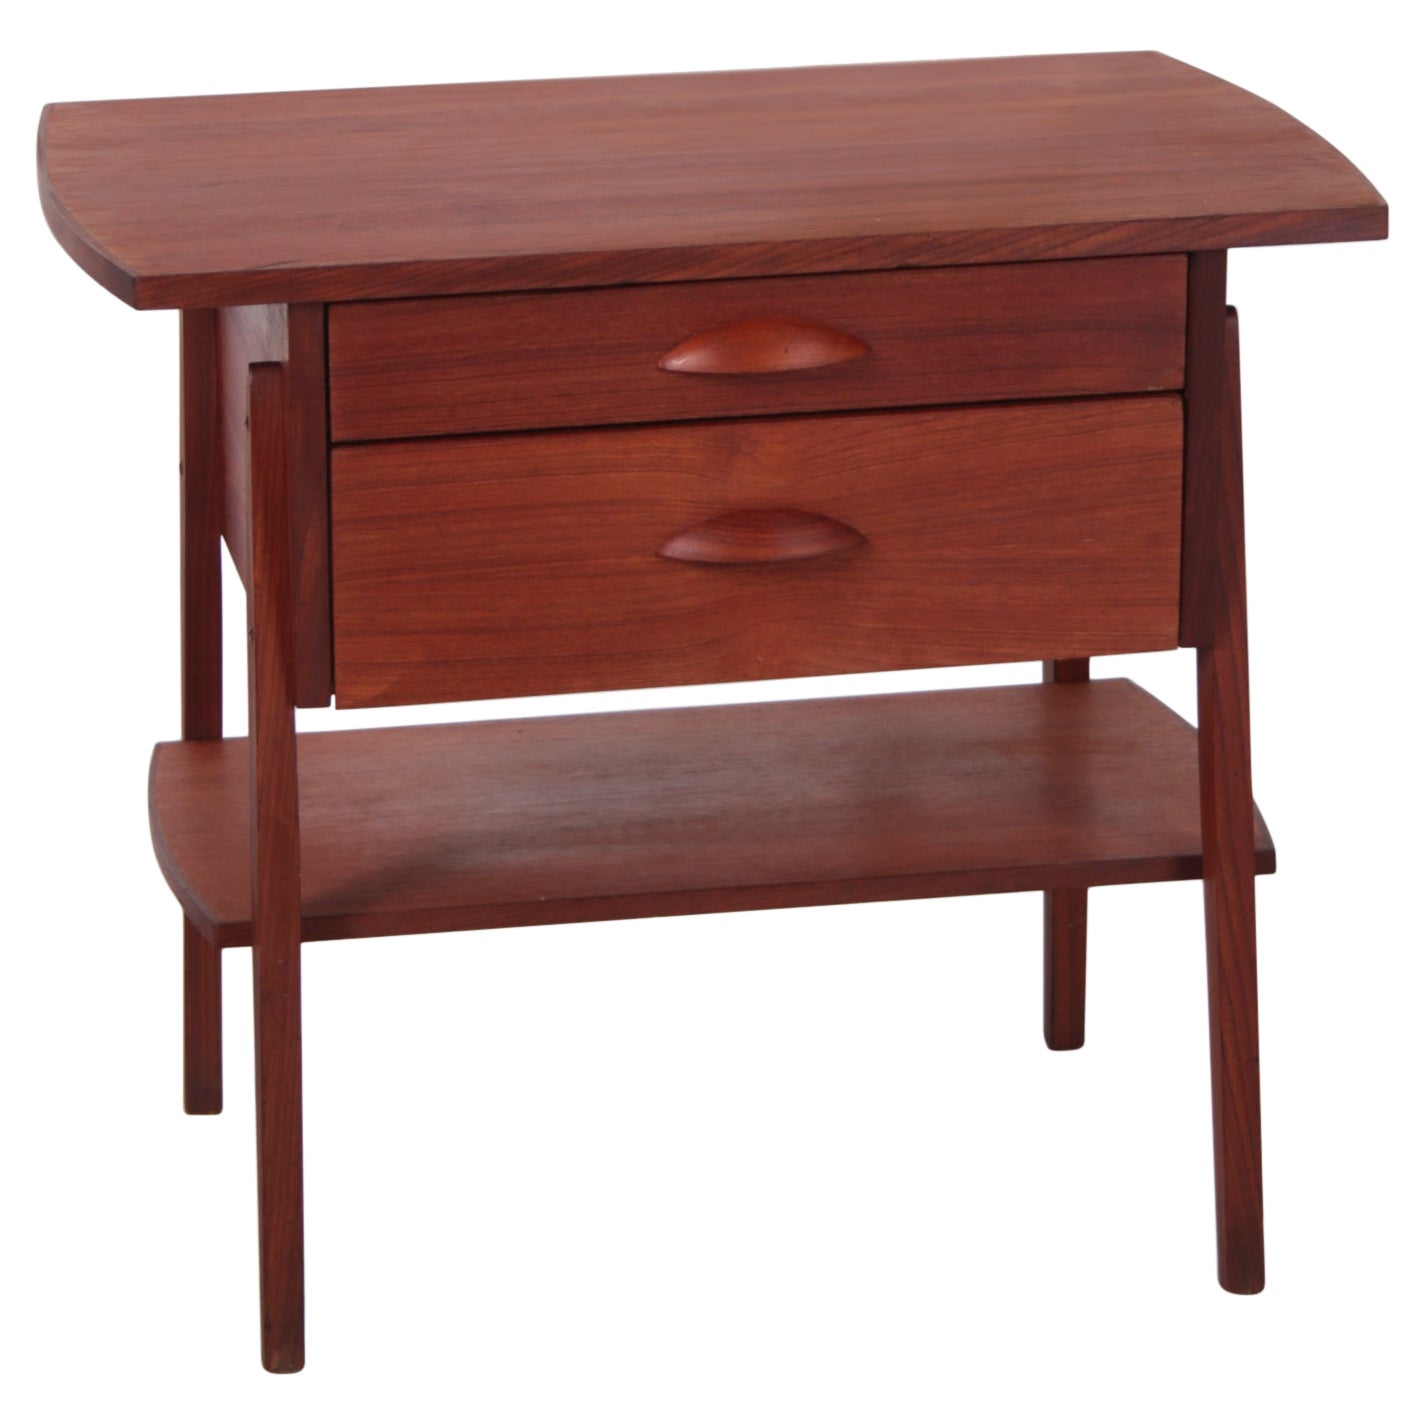 Danish Design Side Table Cabinet Made of Teak with Two Drawers